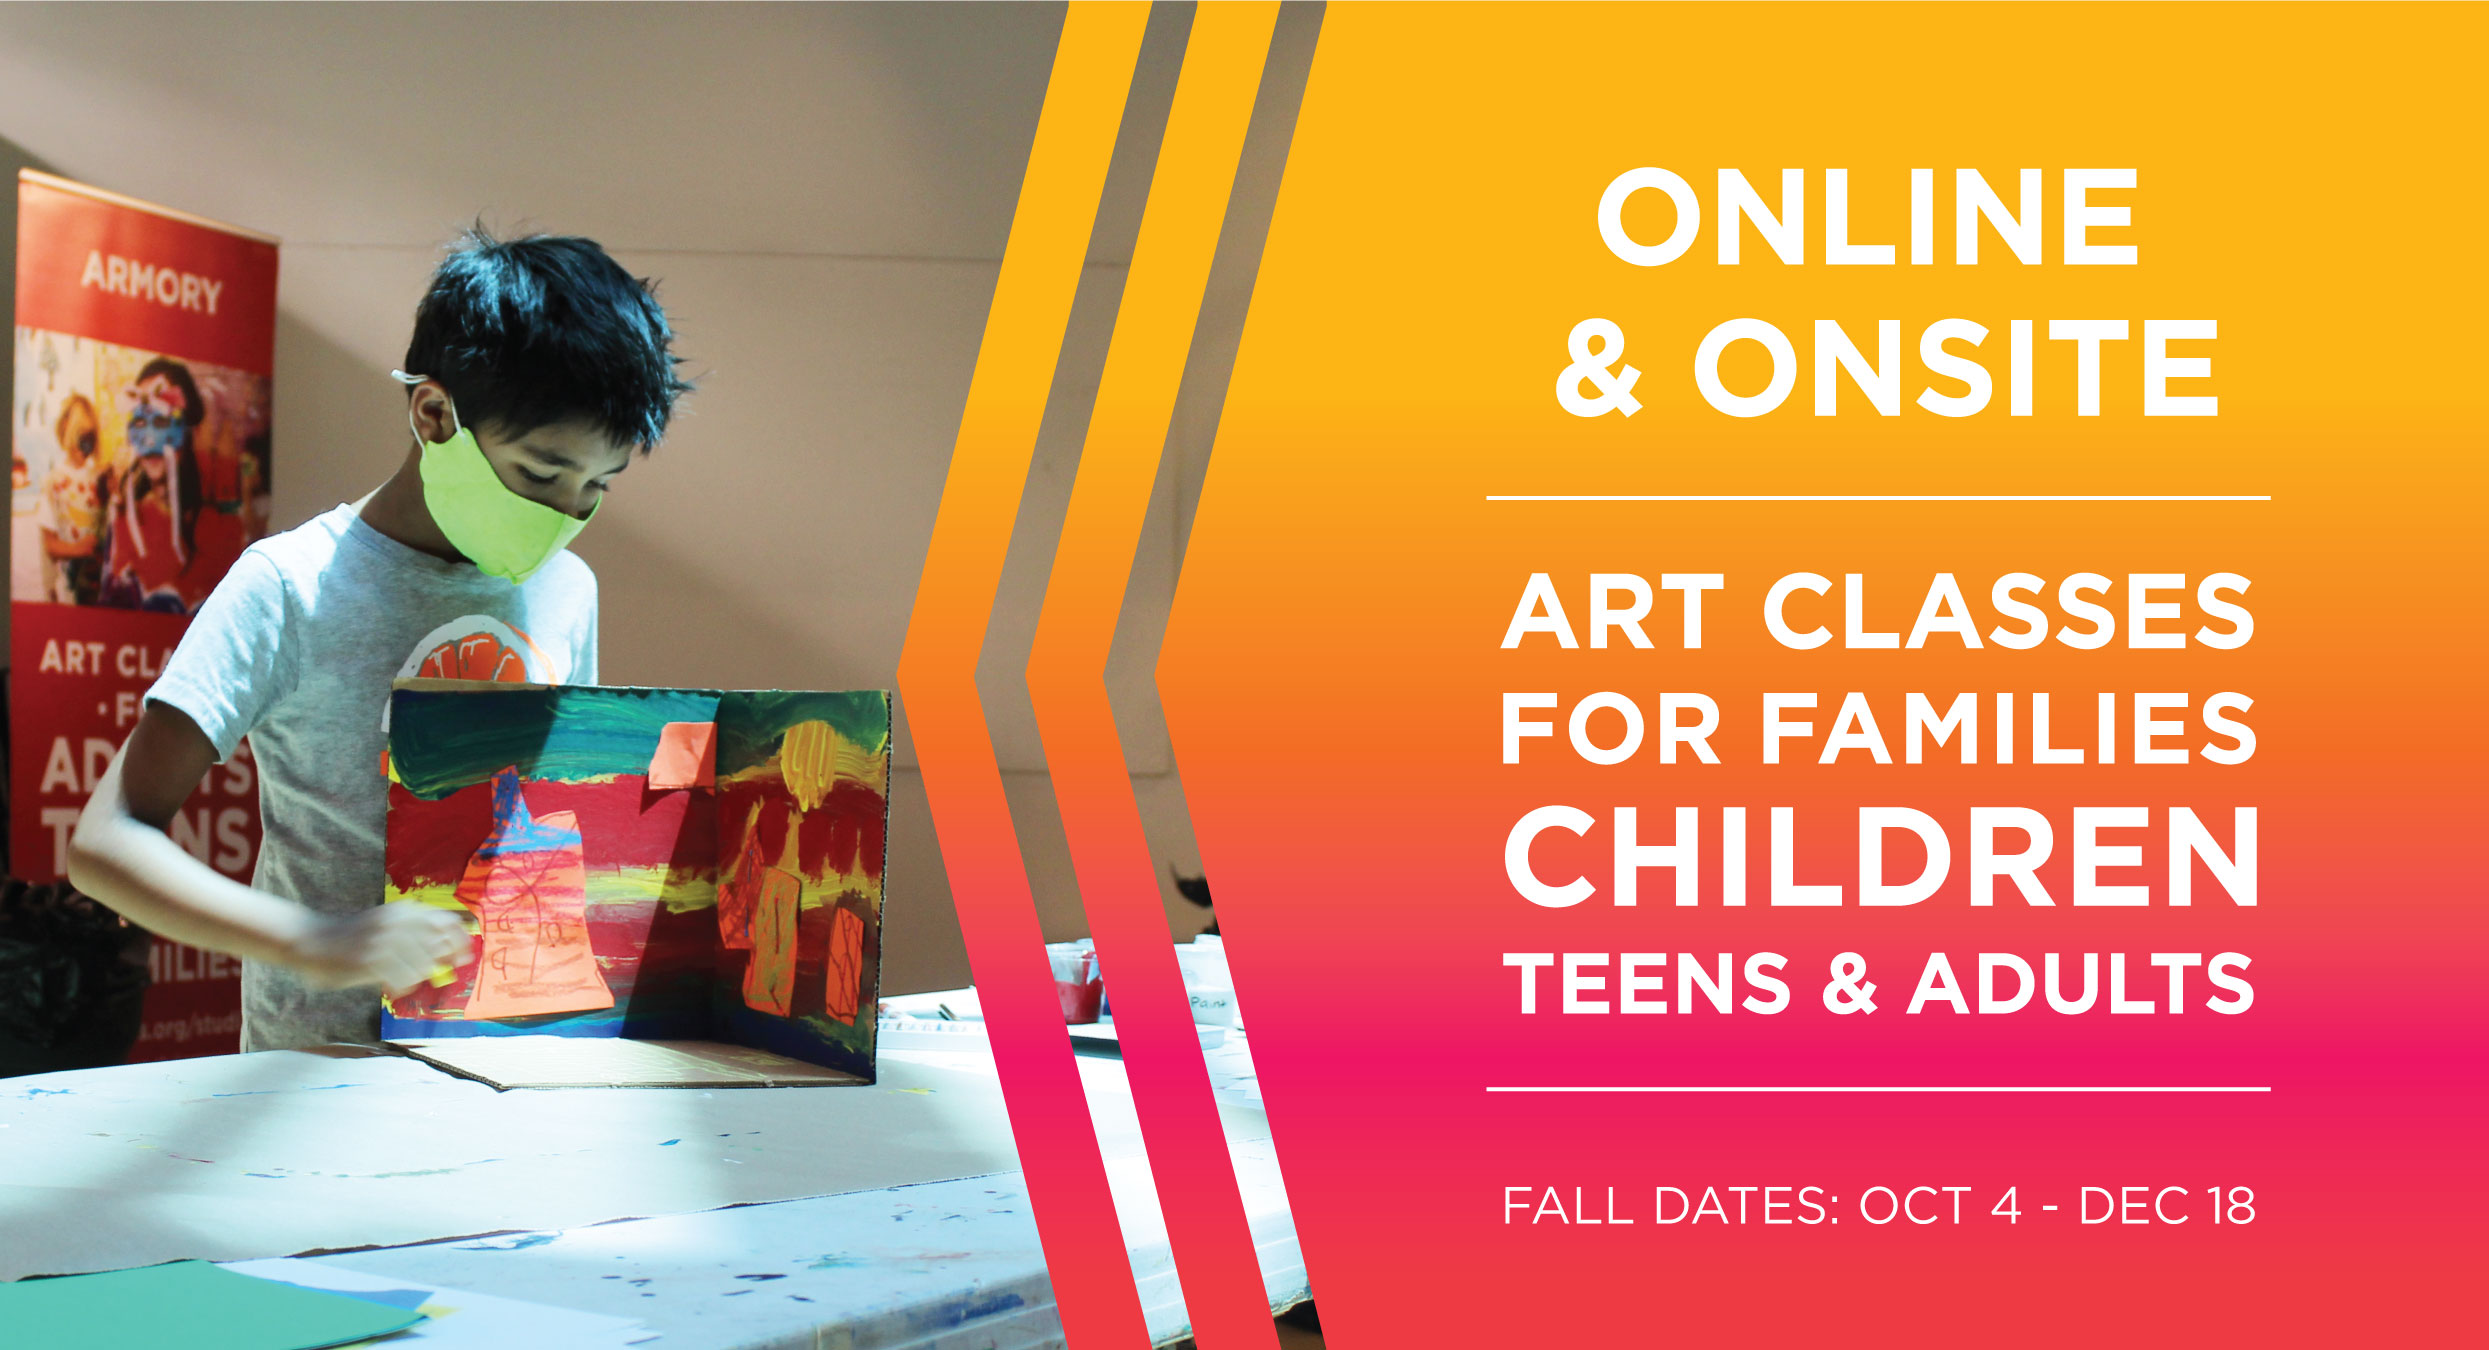  Fall Class Dates Announced: Online & Onsite